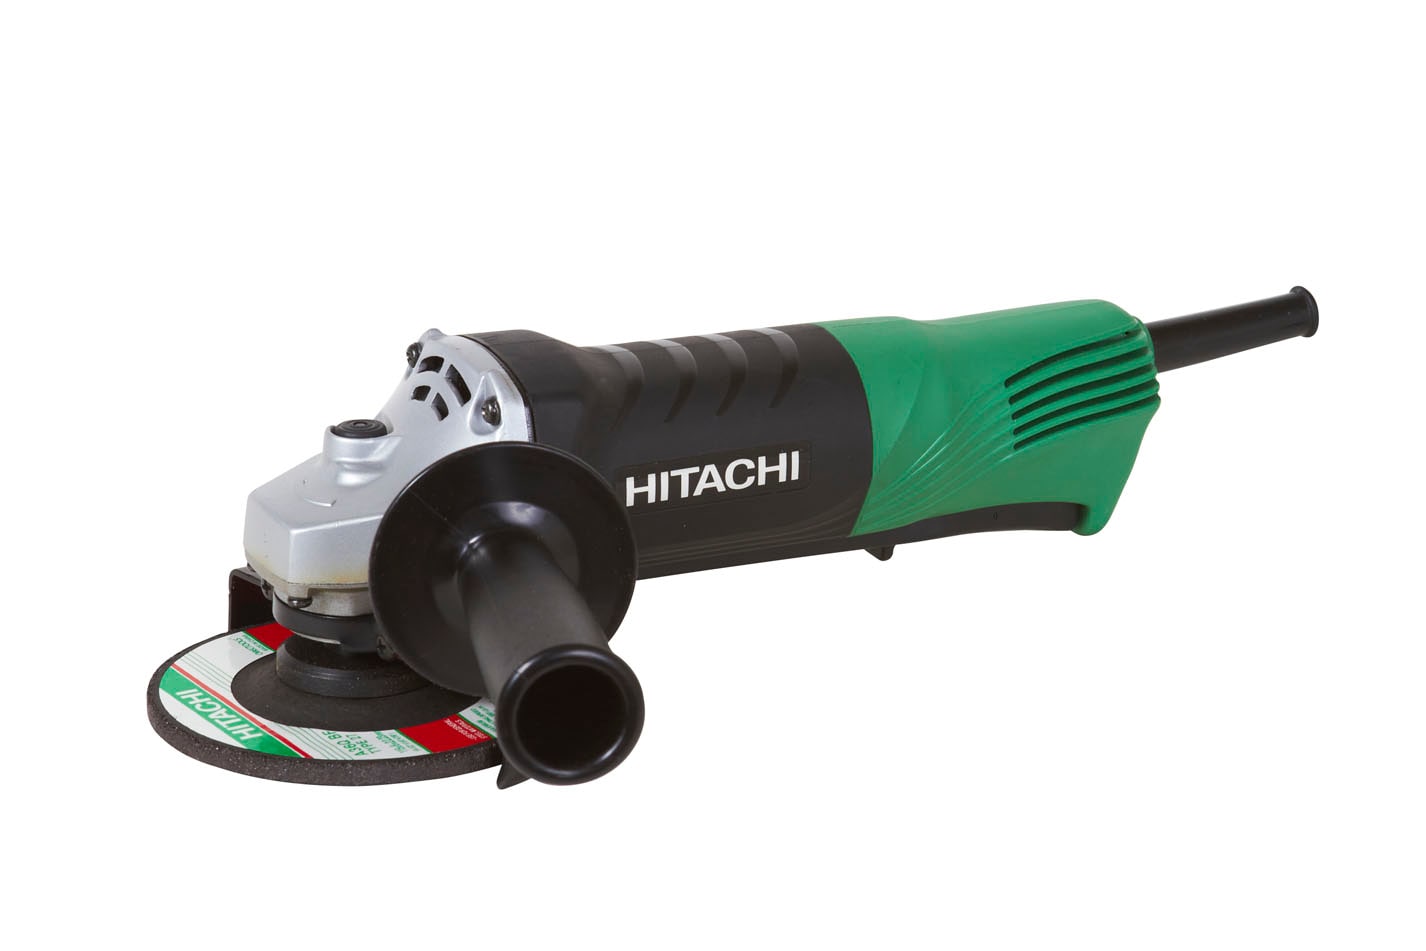 Hitachi 4.5-in 7.4-Amp Paddle Switch Corded Angle Grinder at Lowes.com